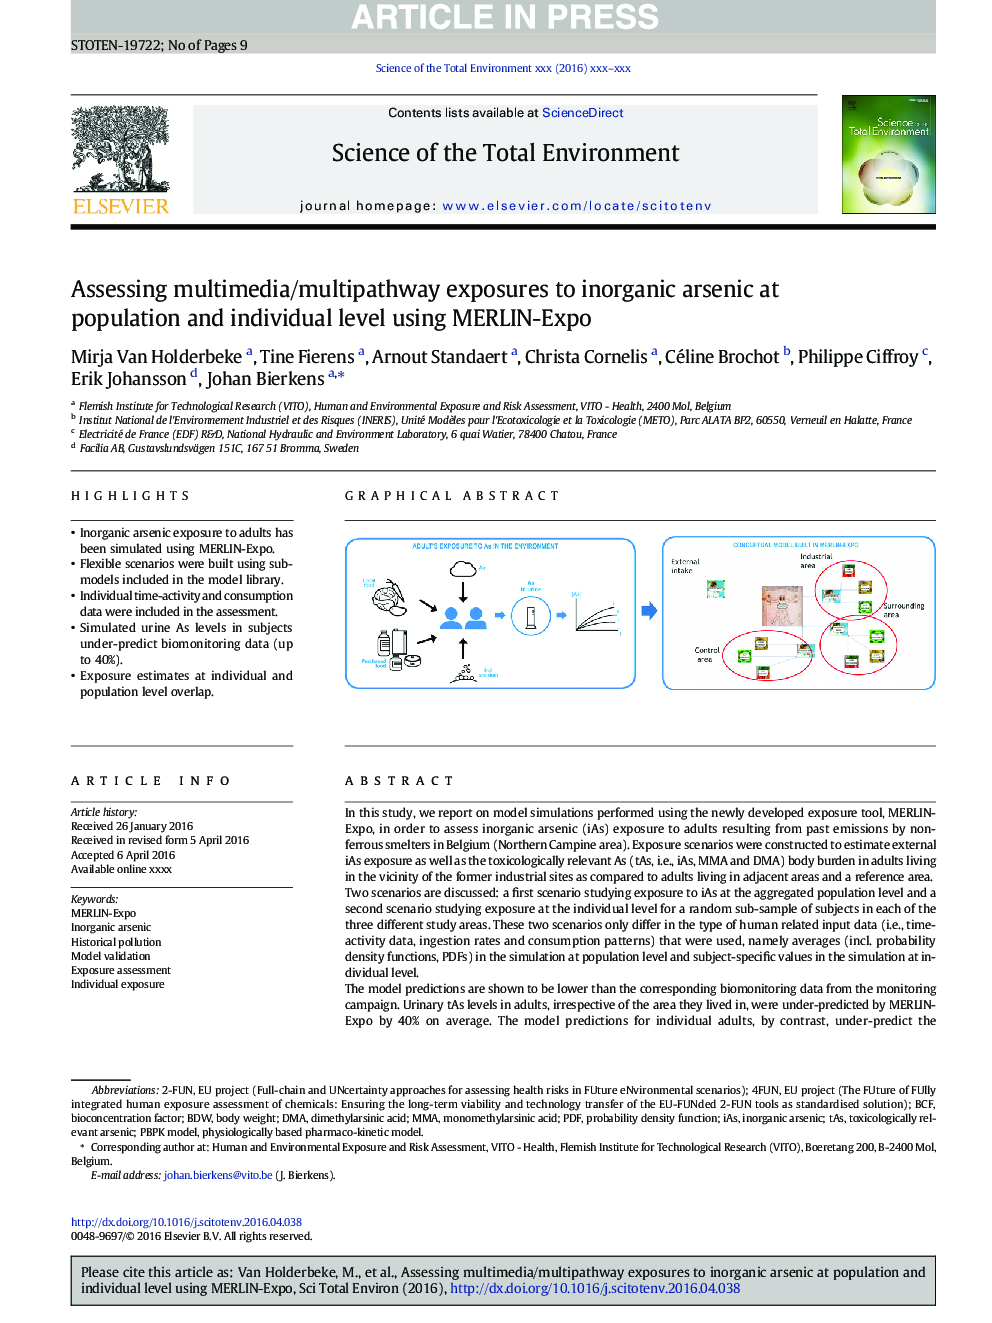 Assessing multimedia/multipathway exposures to inorganic arsenic at population and individual level using MERLIN-Expo